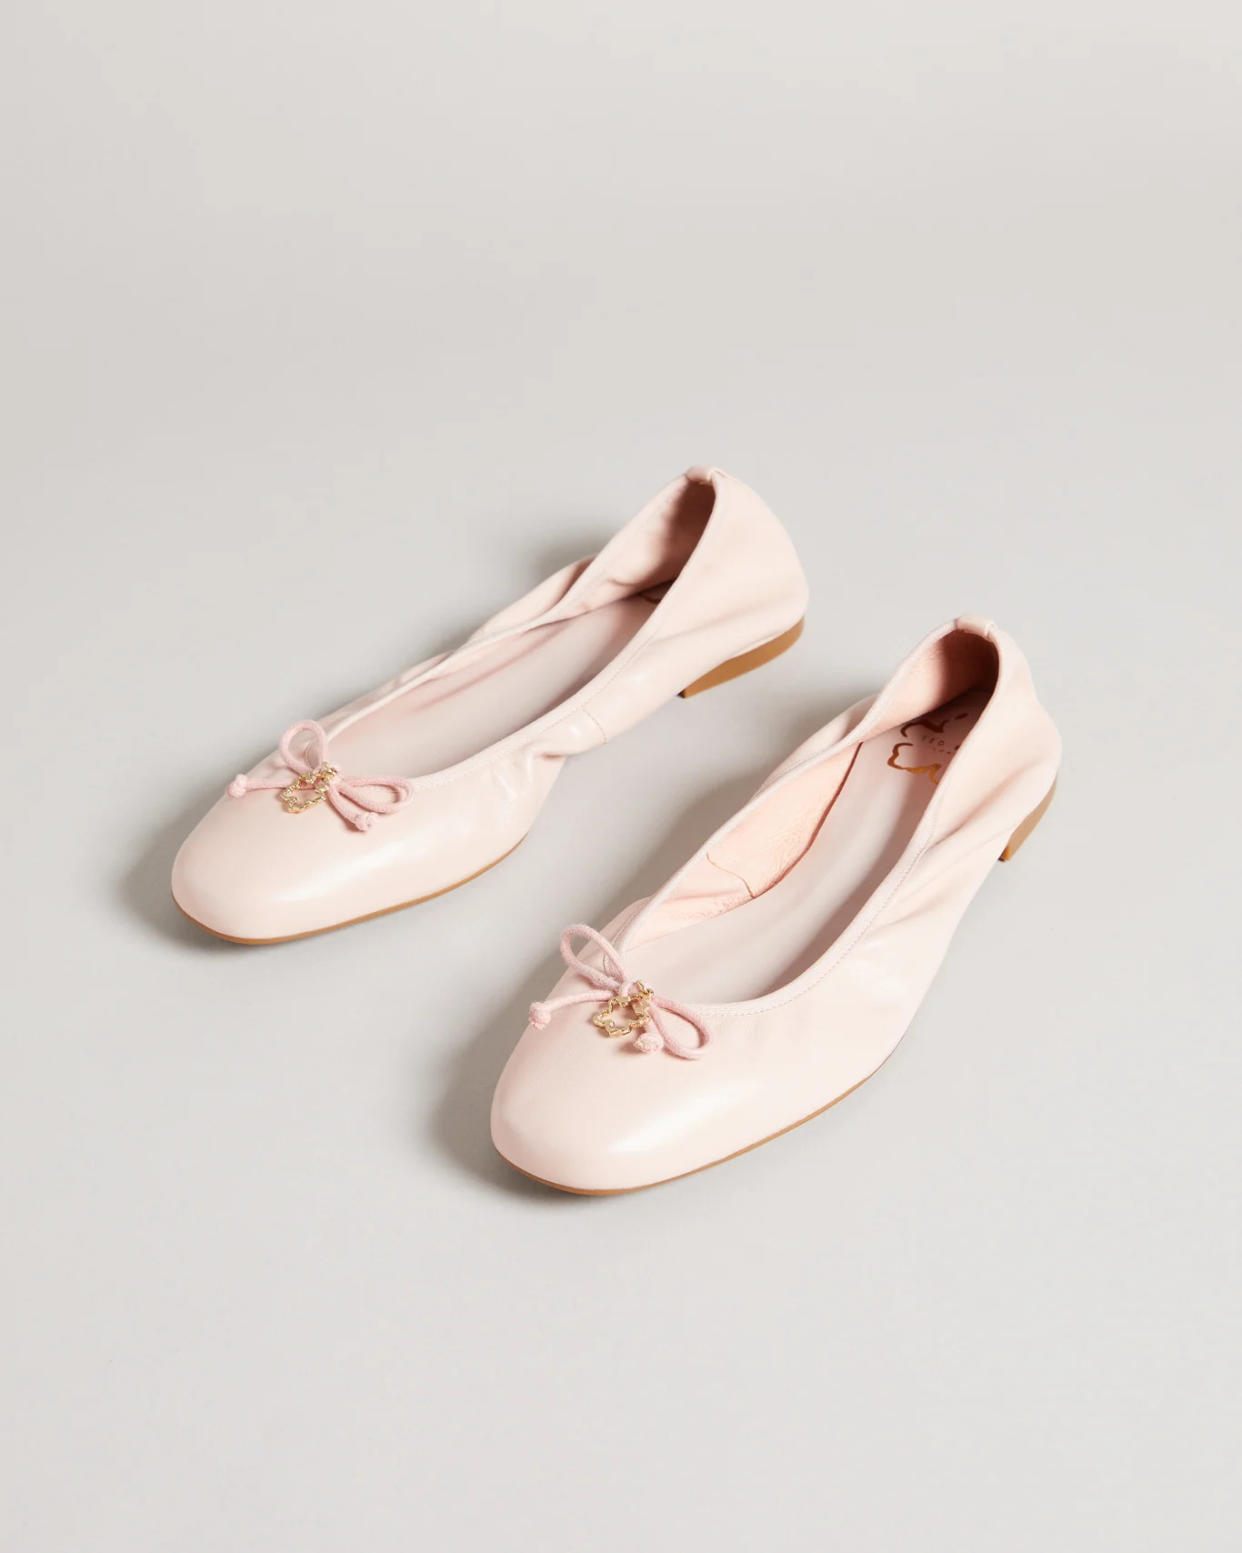 A classic look in the prettiest, softest pink. (Ted Baker)